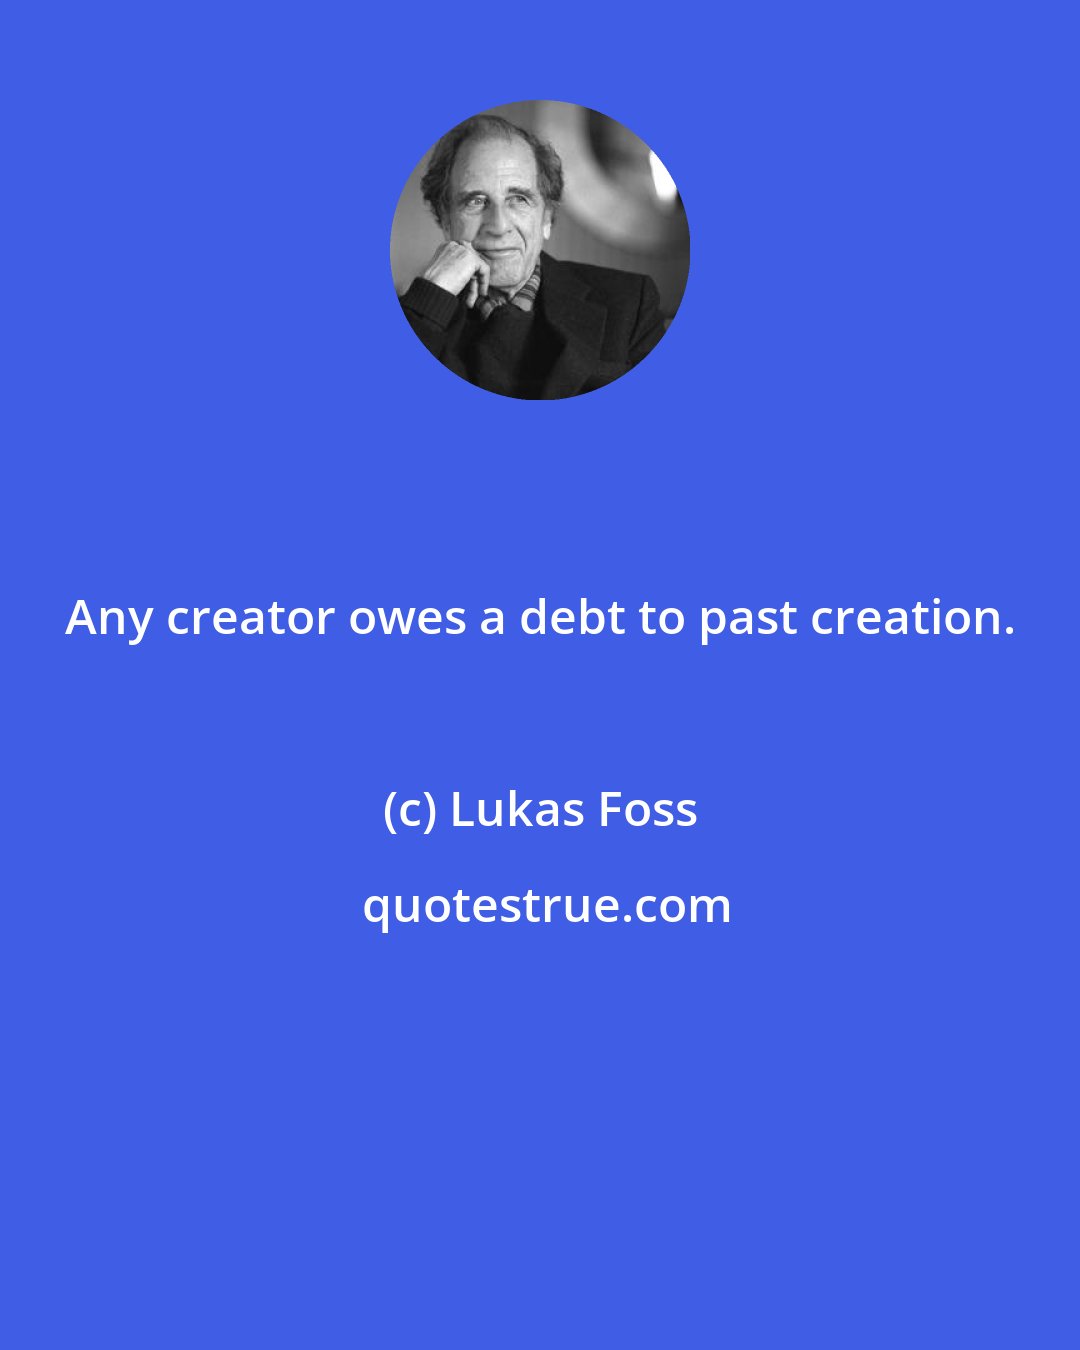 Lukas Foss: Any creator owes a debt to past creation.